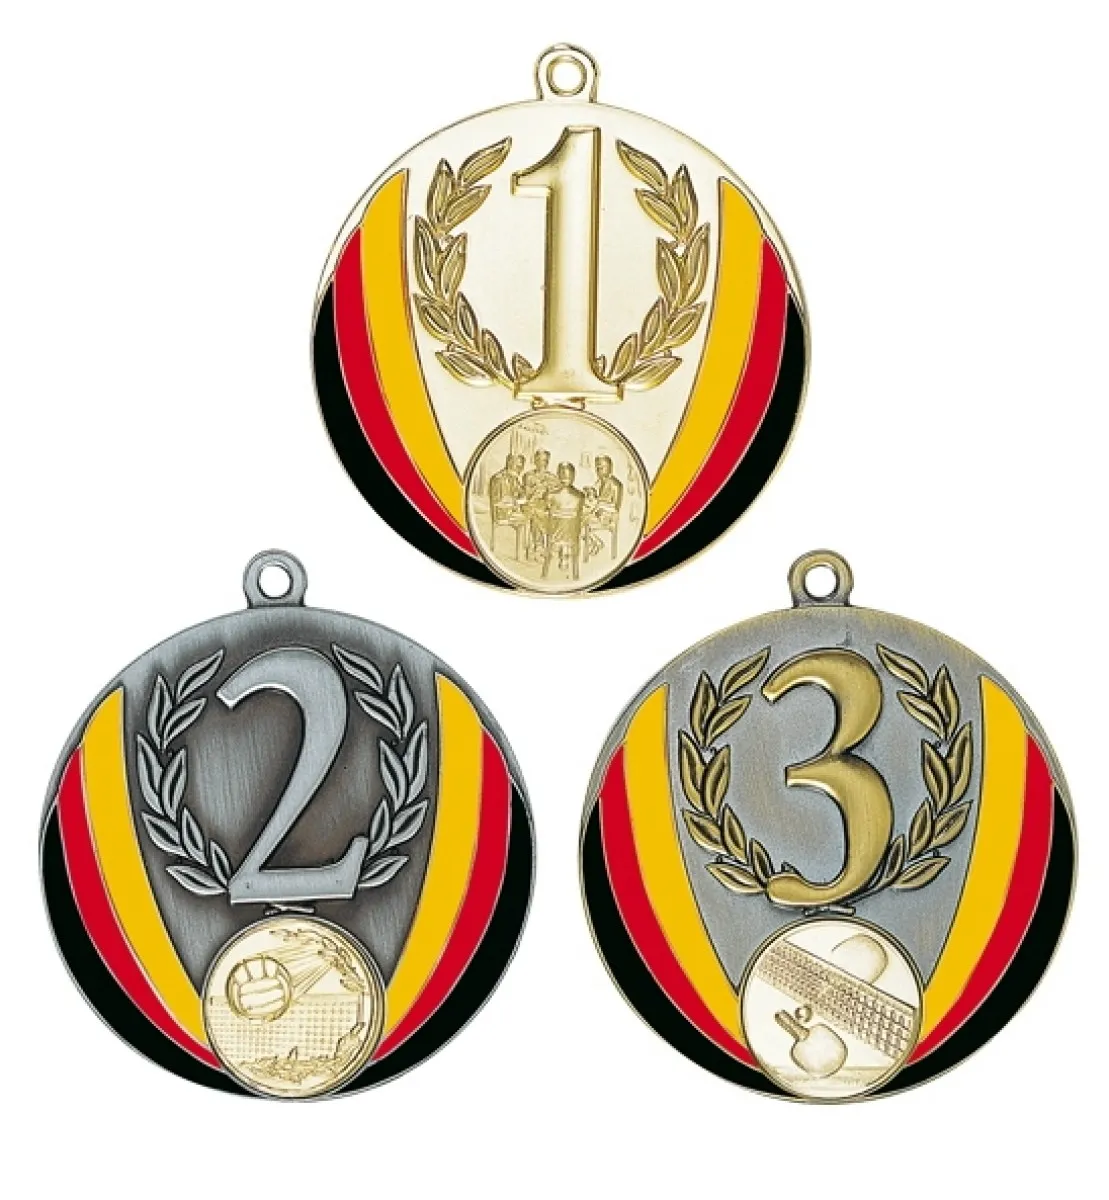 Medals with German flags in gold, silver or bronze. Diameter approx. 7 cm. Emblem size 2.5 cm.